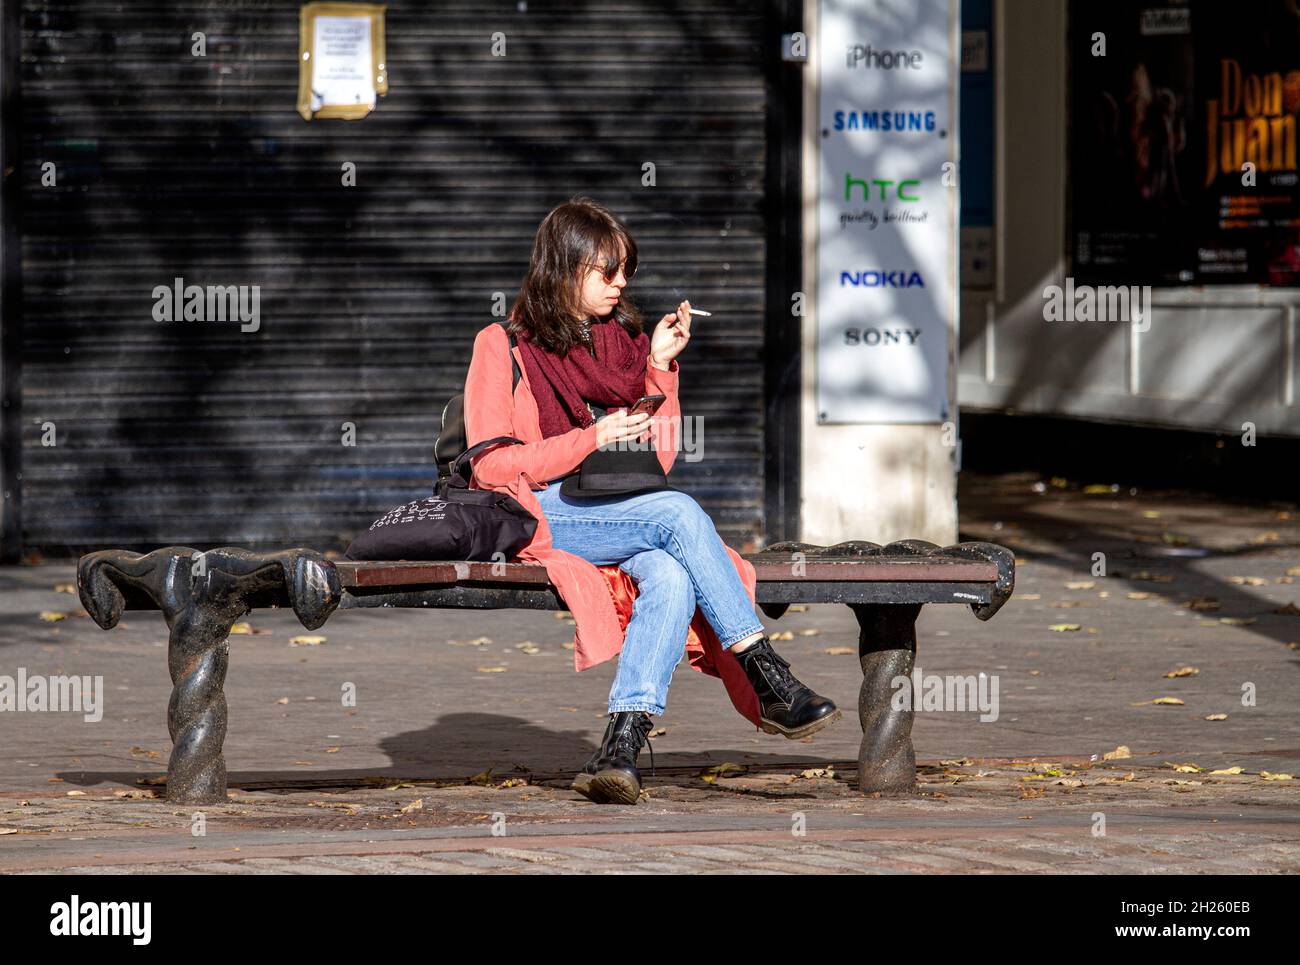 Dundee, Tayside, Scotland, UK. 20th Oct, 2021. UK Weather: A warm sunny Autumn day with a strong breeze across North East Scotland, temperatures reaching 14°C. An attractive young woman is spending the day out enjoying the October sunshine texting messages on her mobile phone whilst shopping in Dundee city centre. Credit: Dundee Photographics/Alamy Live News Stock Photo